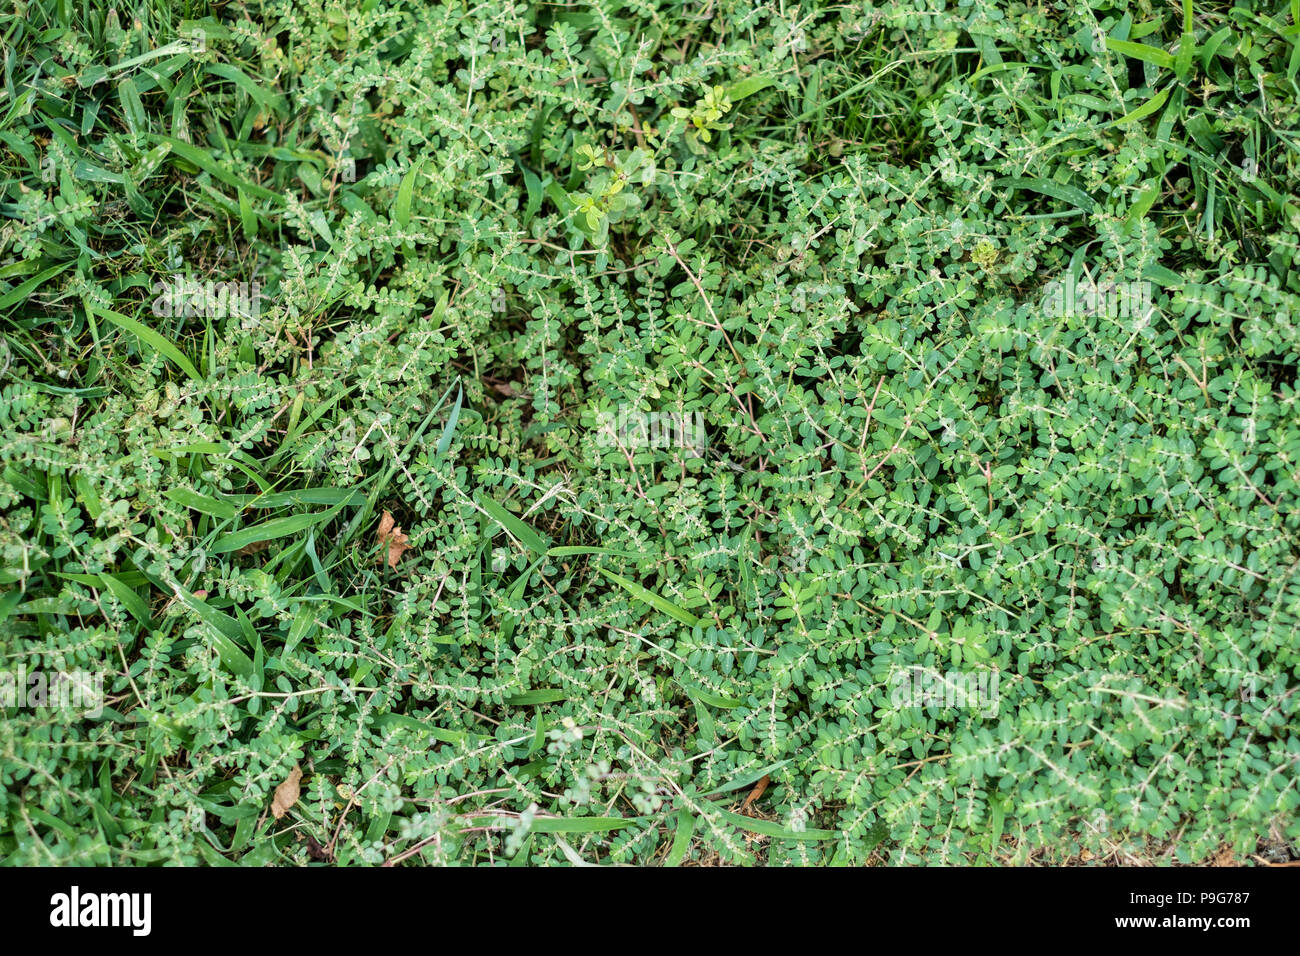 Euphorbia prostrata, a milky invasive weed very undesirable mixed with Digitaria sanguinalis, hairy crabgrass in a cut lawn in Kansas, USA. Stock Photo